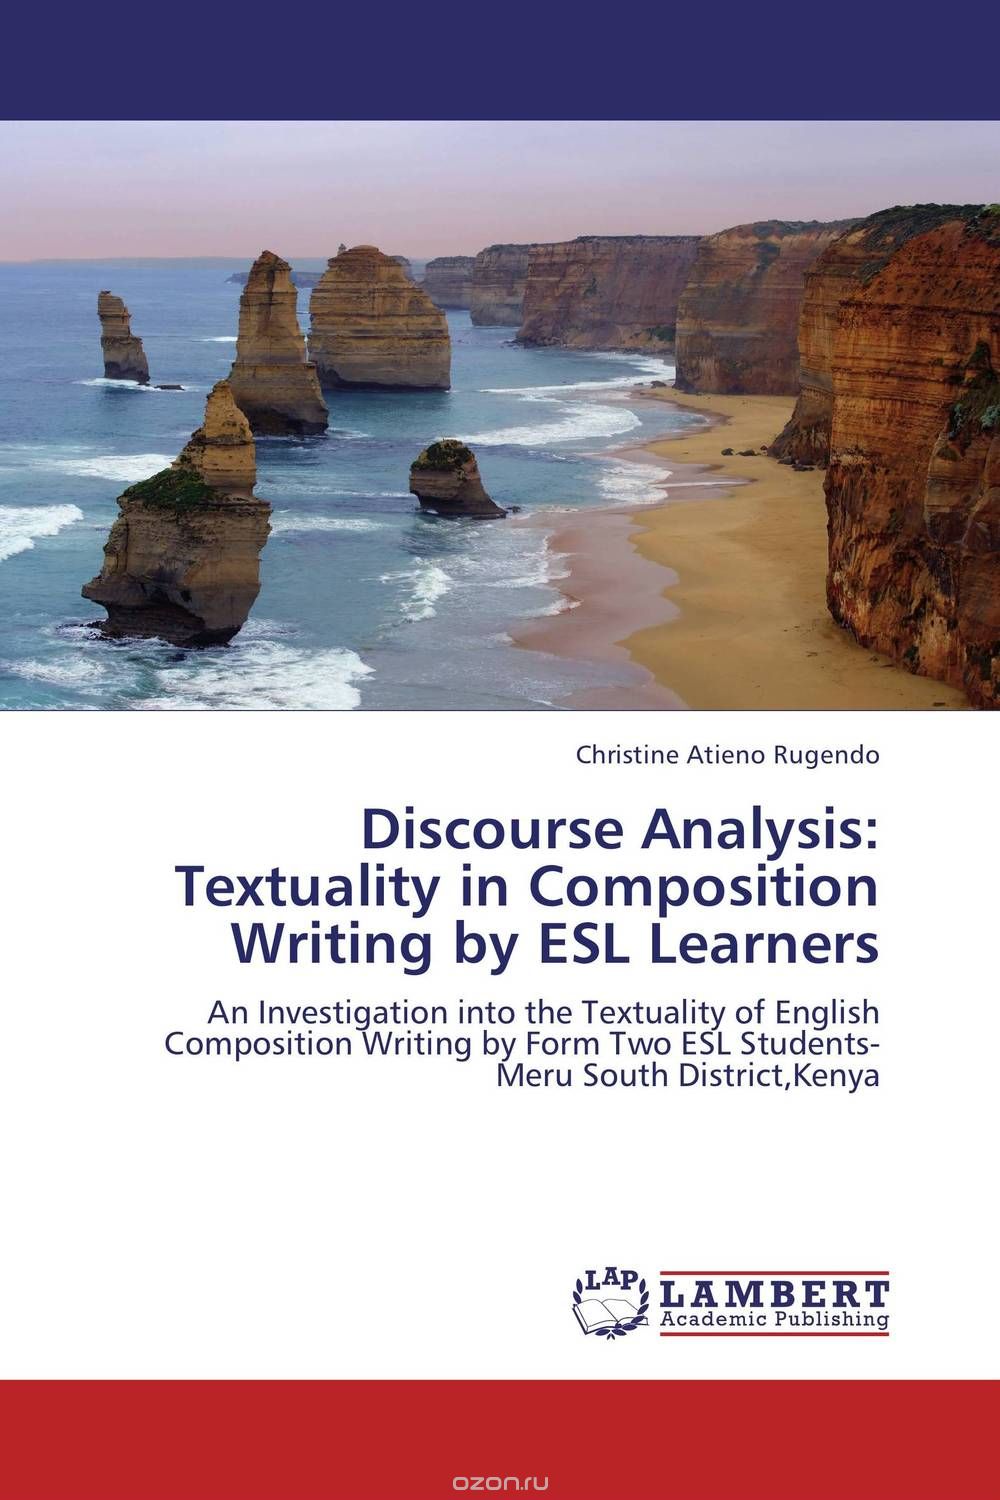 Discourse Analysis: Textuality in Composition Writing by ESL Learners